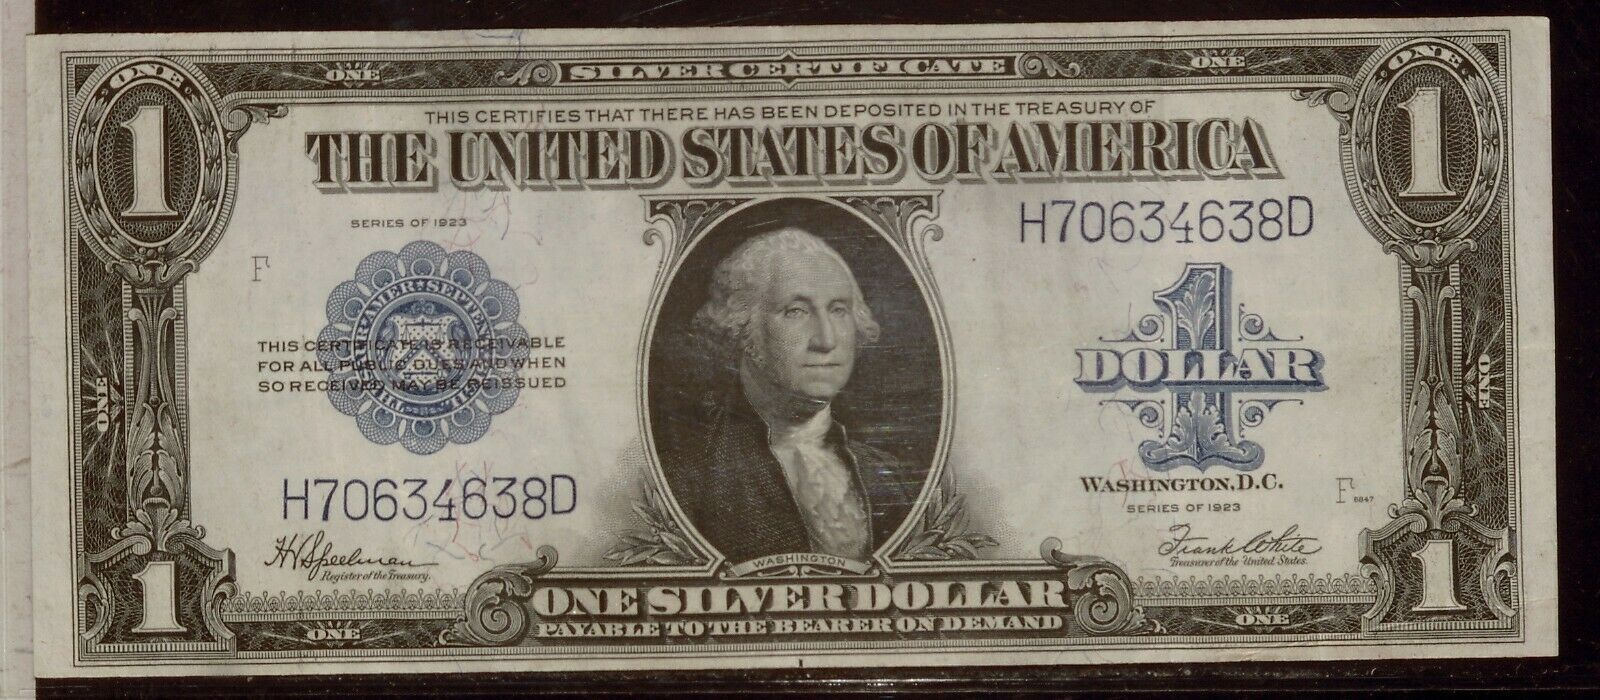 1923 United States $1.00 Silver Certificate | VF/XF | Spellman | H70634638D